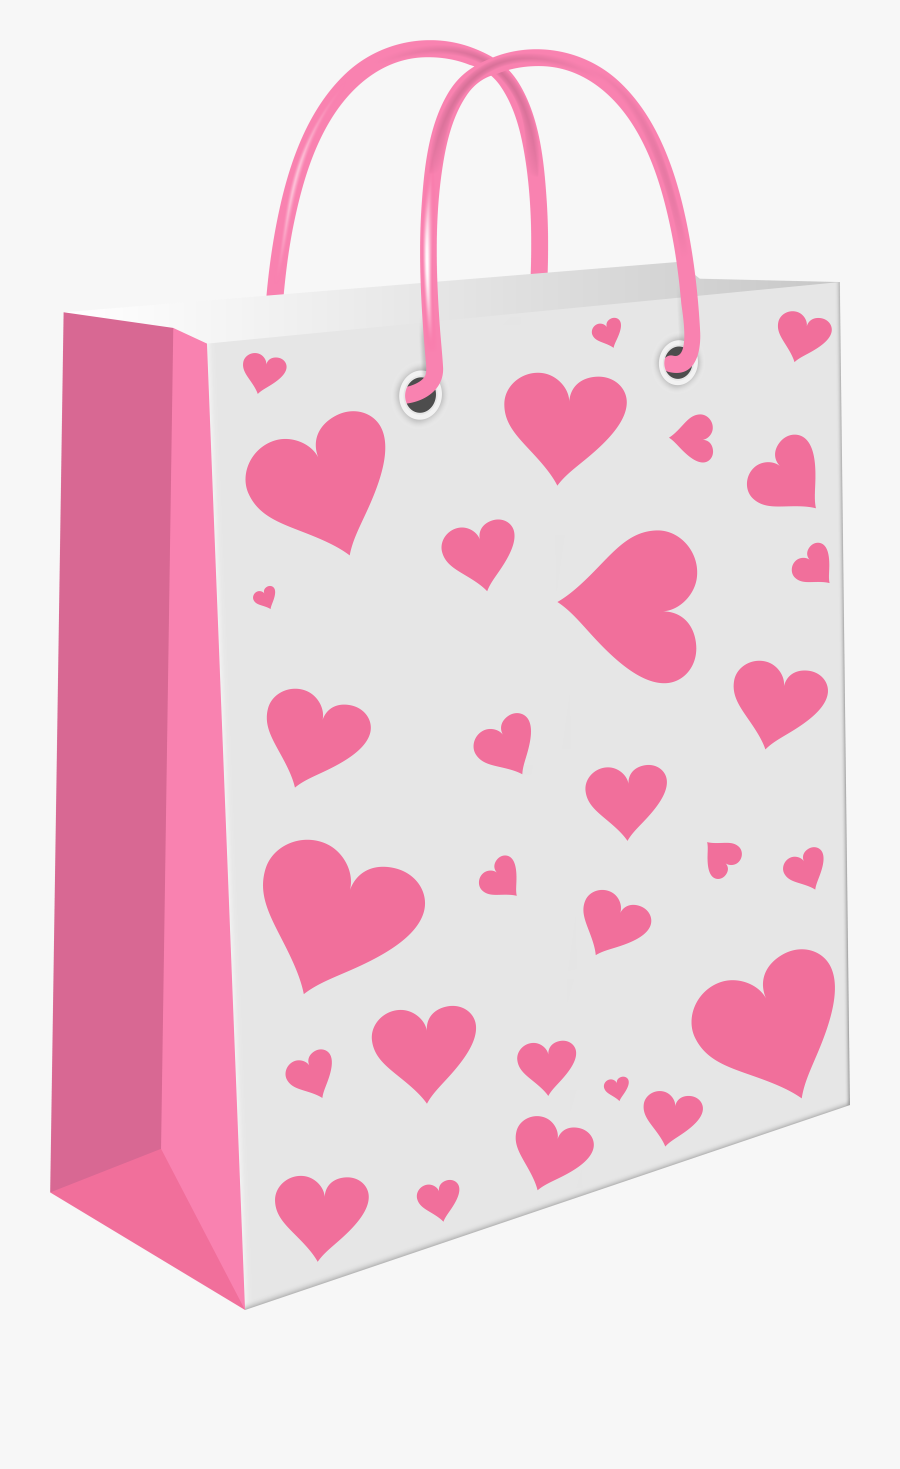 Gift Bags Png - Clipart Gift Bags Png, Transparent Clipart